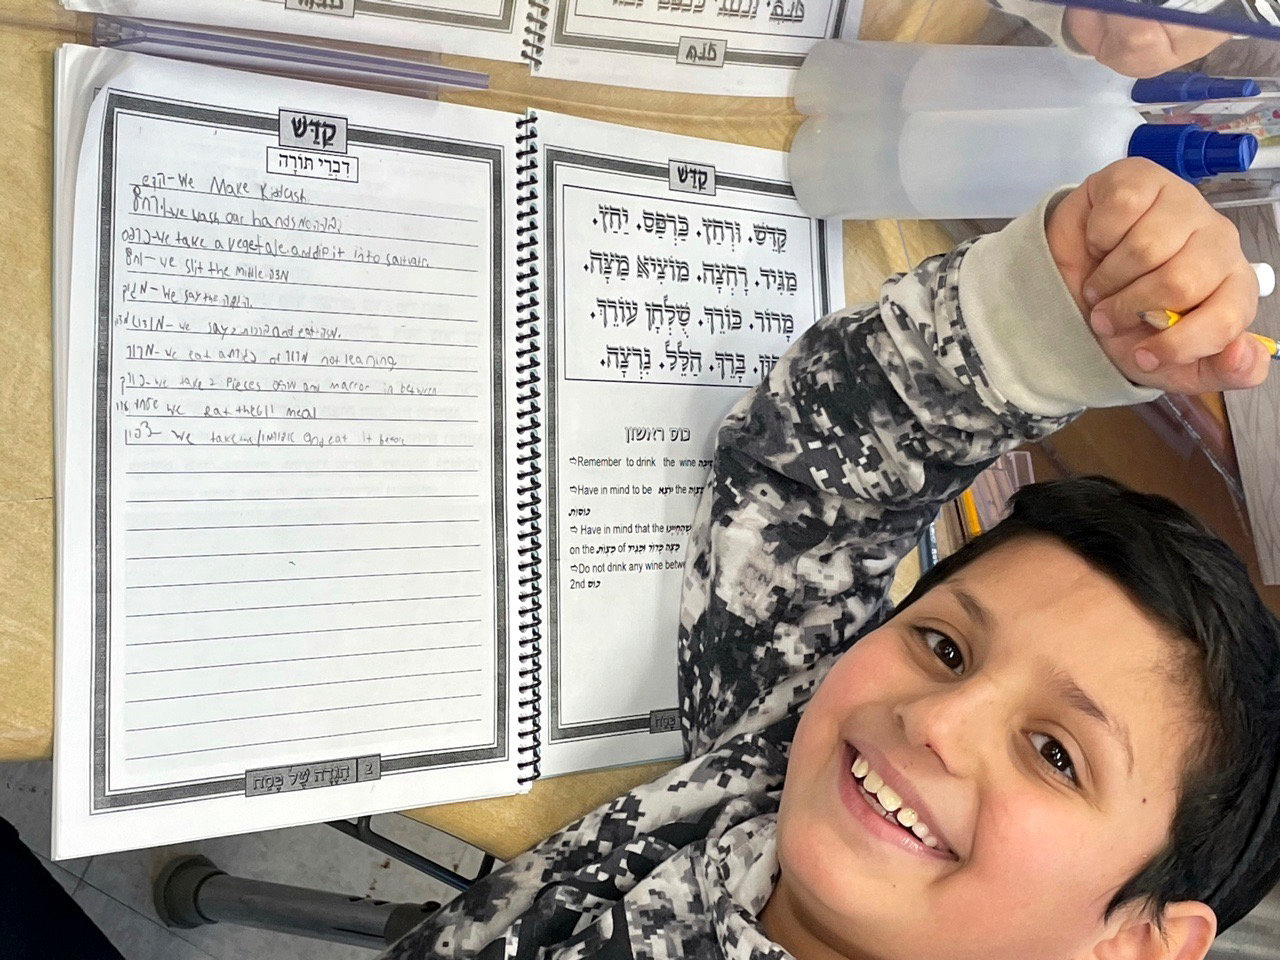 In CAHAL’s grade 4-5 class at YOSS, boys learned divrei torah and wrote them in their Haggadahs to read at the Seder.